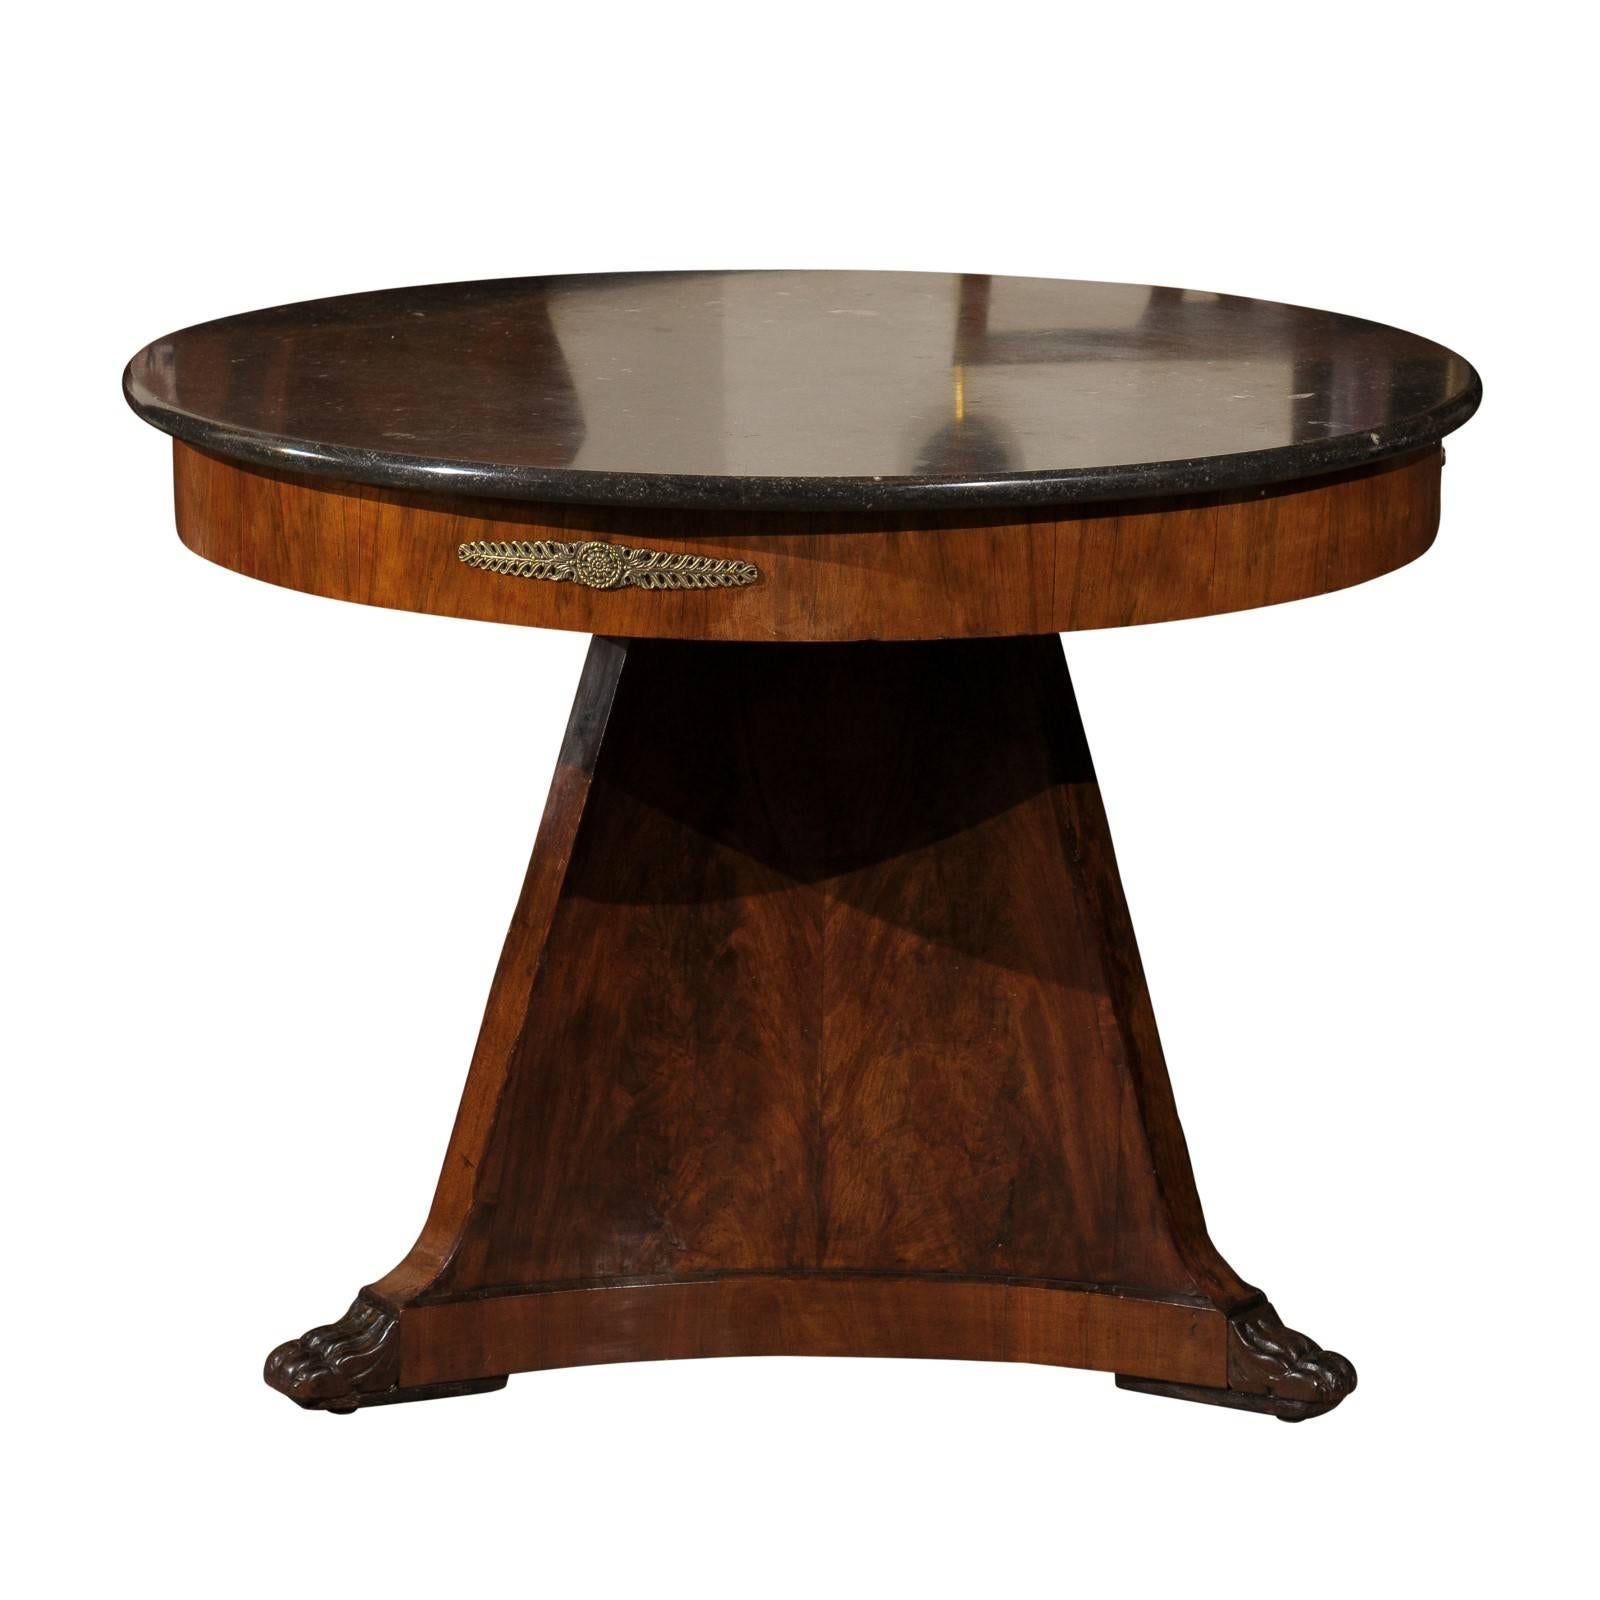 19th Century French Empire Center Table with Grey Marble Top and Paw Feet